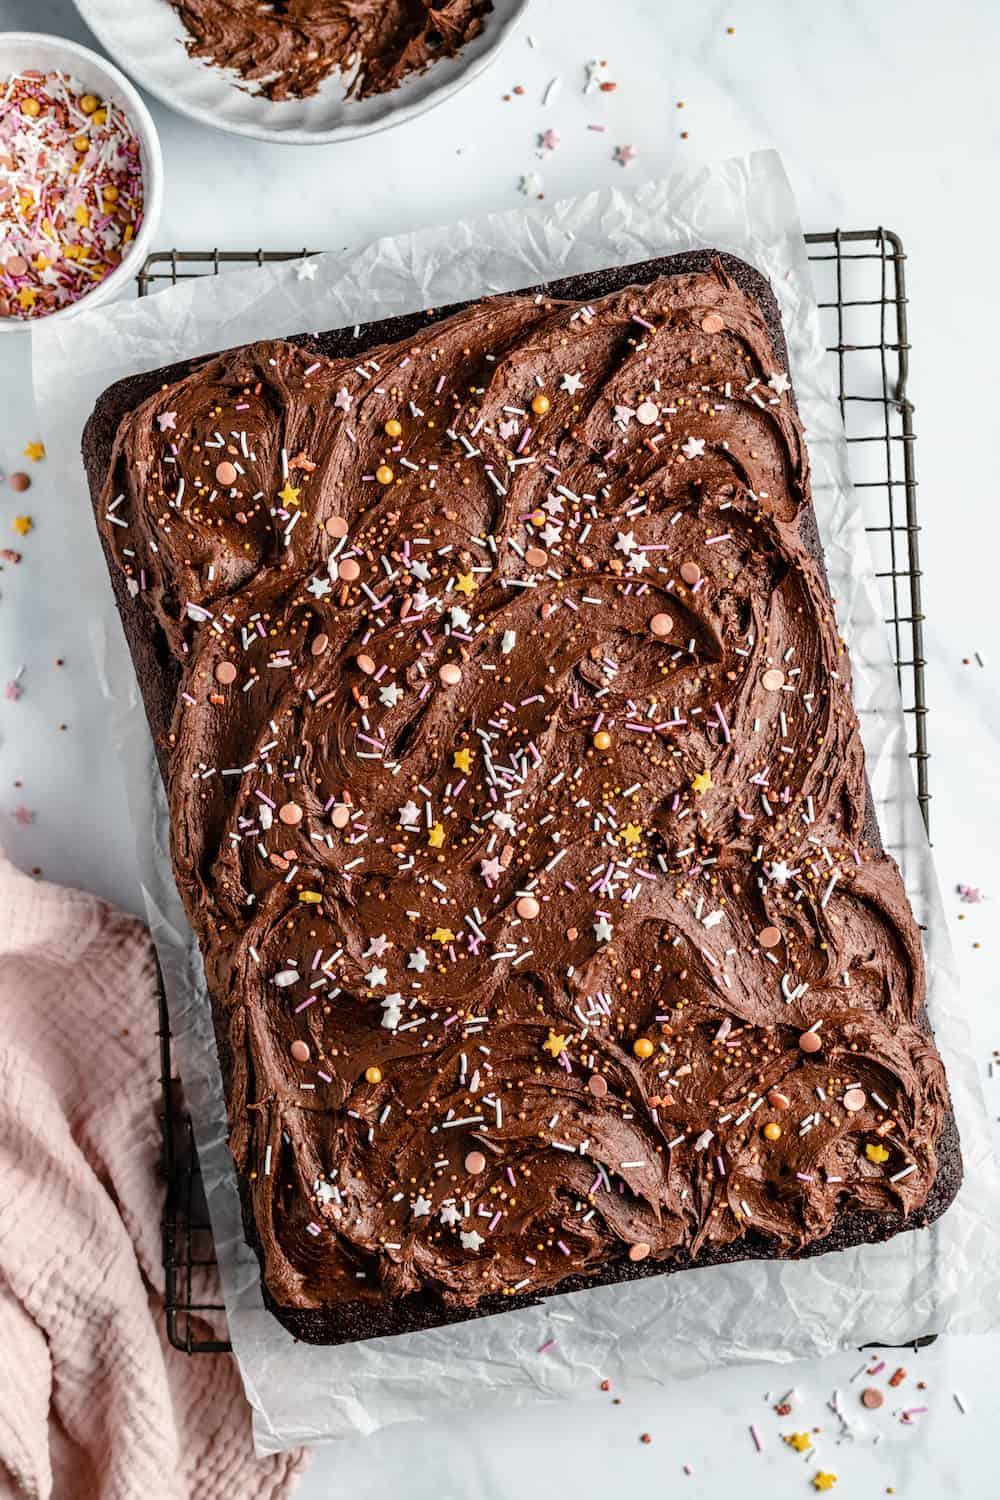 Chocolate sheet cake with chocolate frosting and sprinkles.